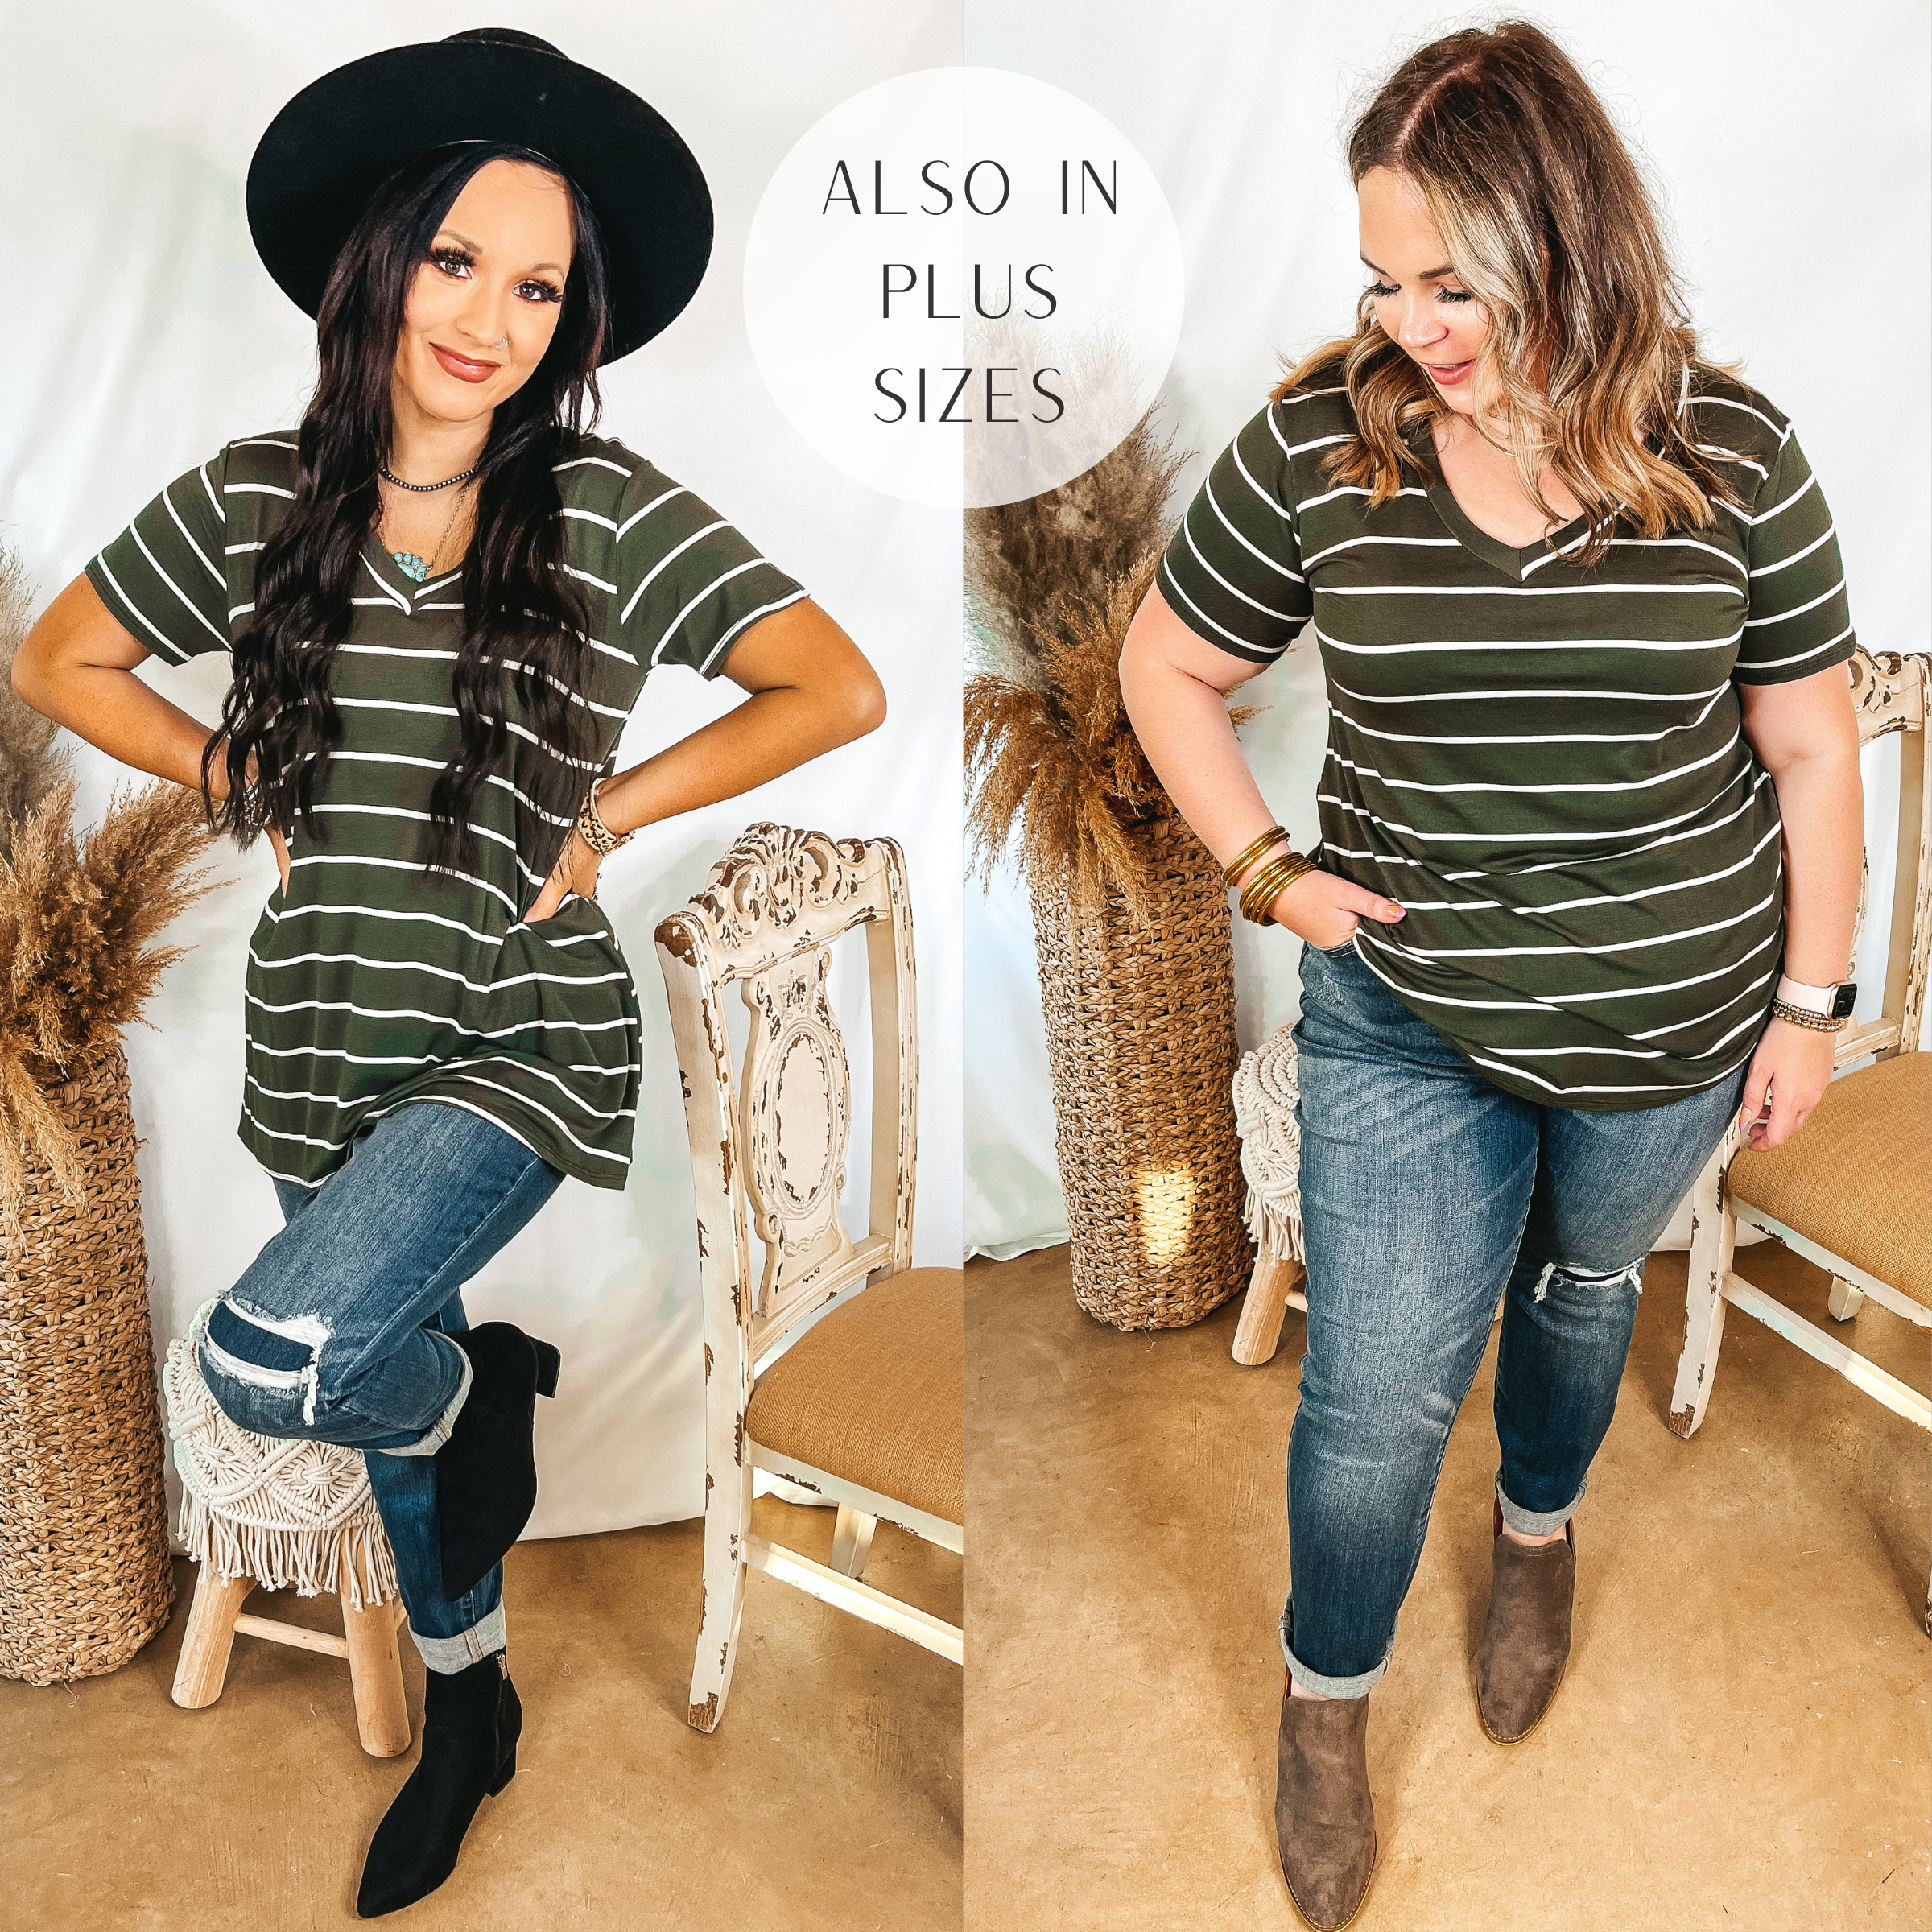 Models are wearing an olive green top with white stripes. Both models have this striped top paired with patch knee boyfriend jeans. Size small model has it paired with black booties and a black hat. Size large model has it paired with taupe booties.